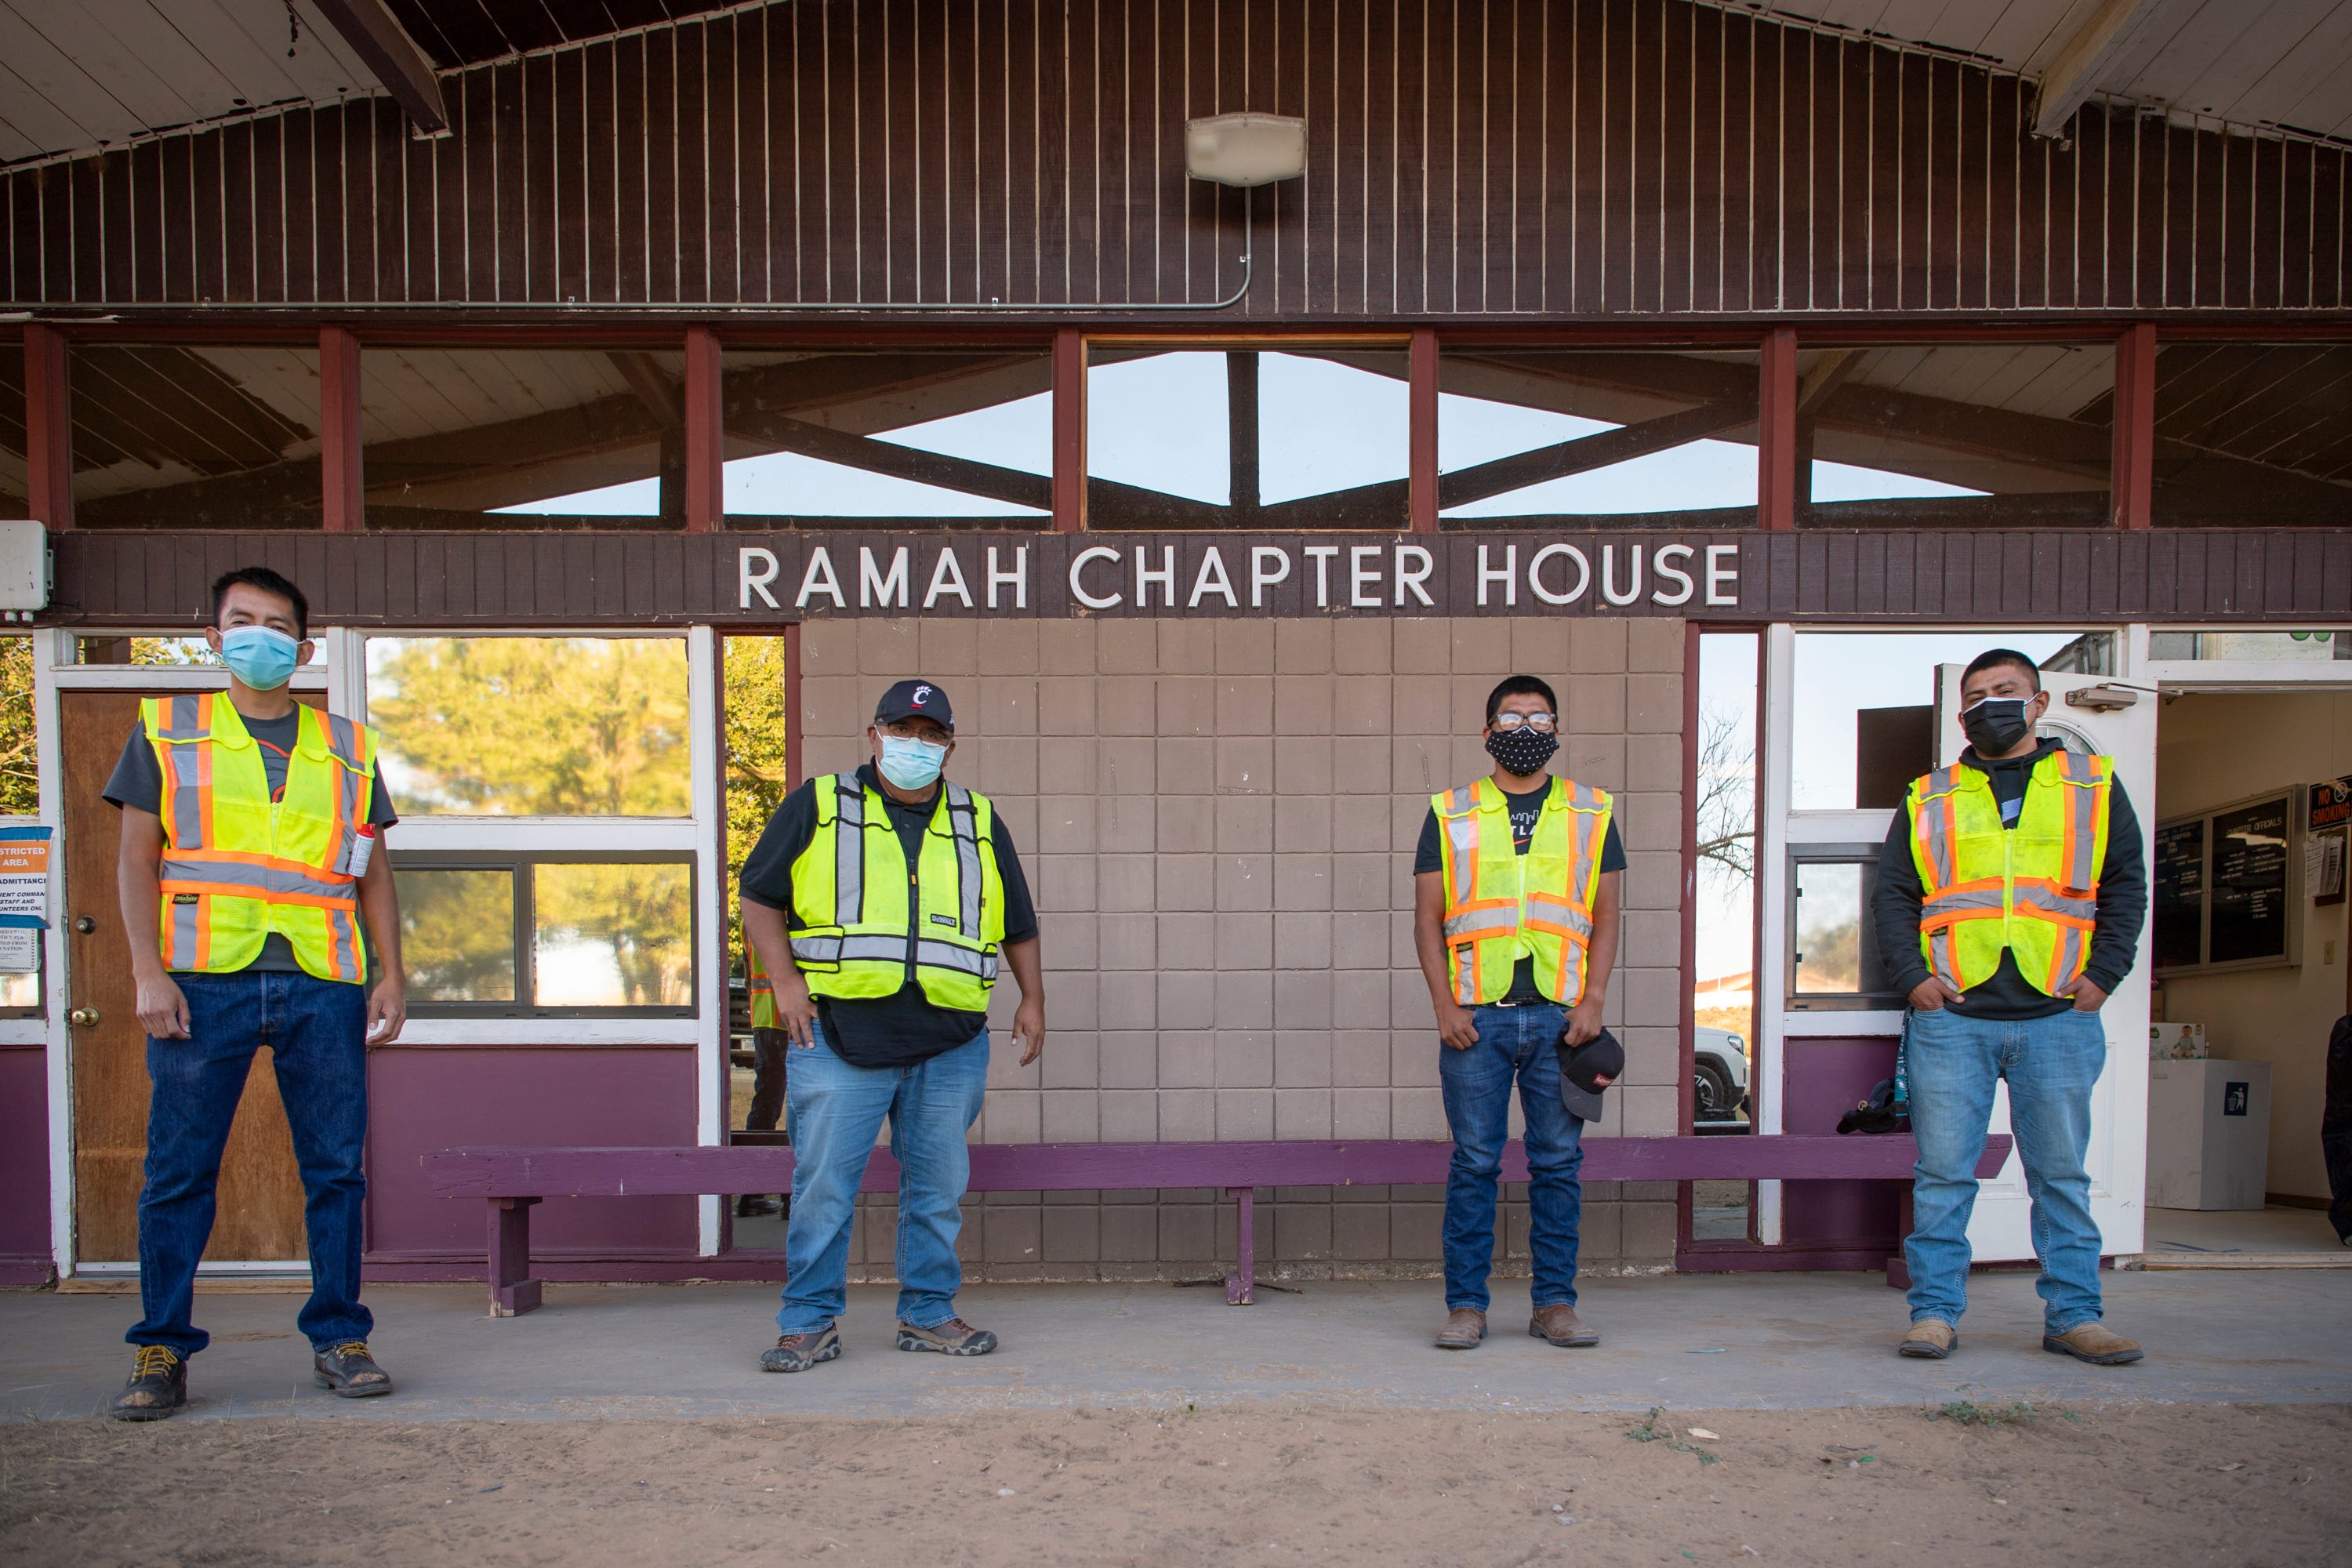 Derek Henio, Randy Chatto, Vernard Martinez and Jimmie Begay, from left, pose for a photo in front of the Ramah Chapter House, where they stage deliveries of supplies to at-risk residents on the Ramah Navajo Indian Reservation.